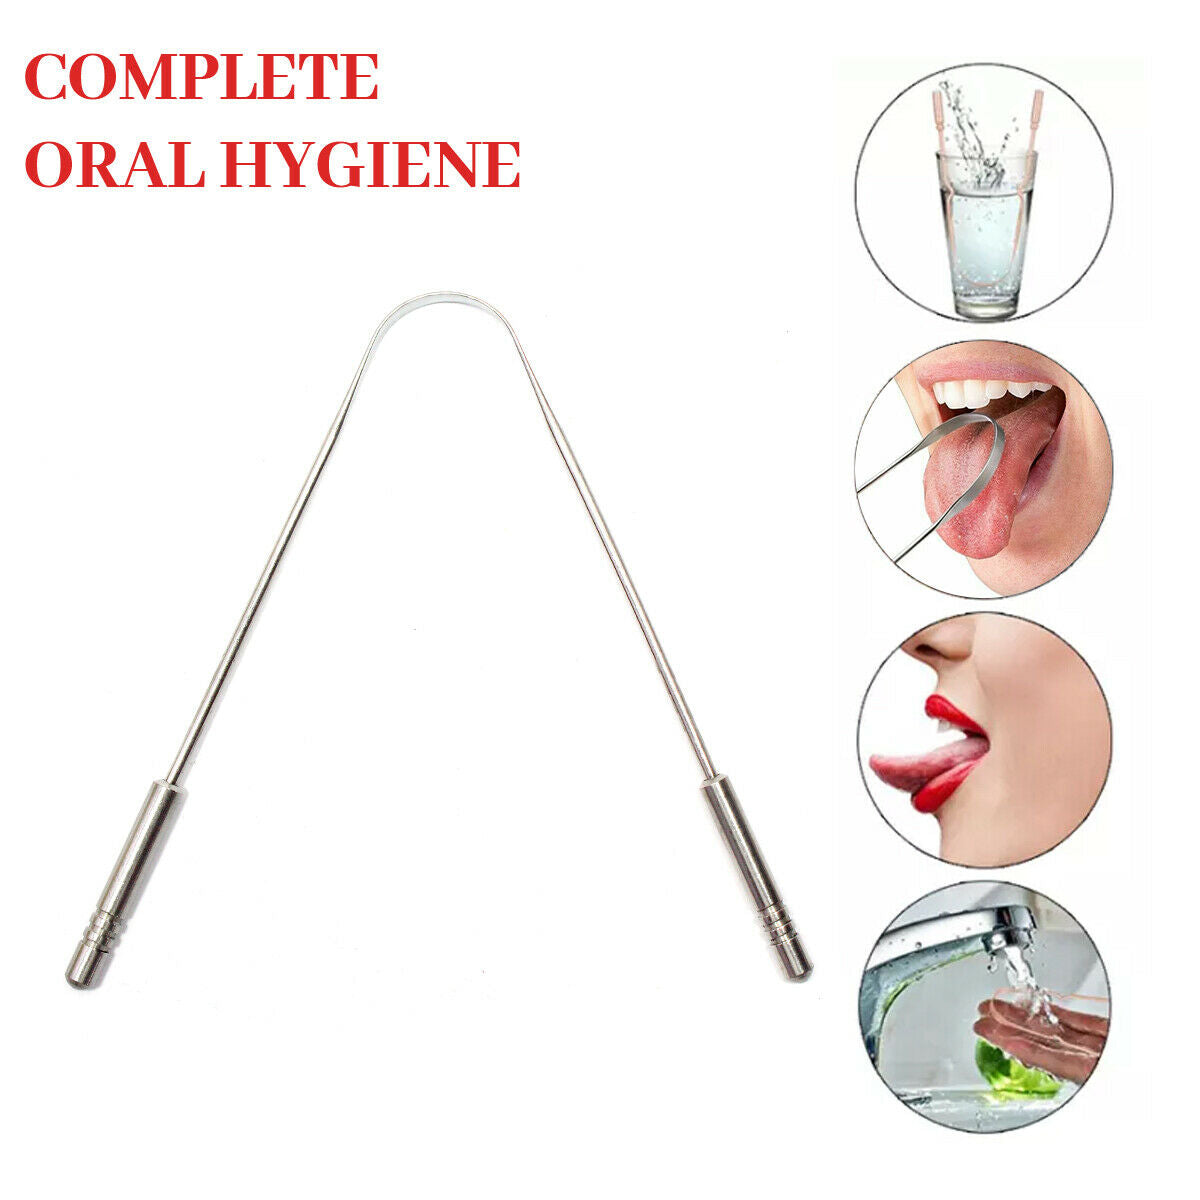 2x Stainless Steel Tongue Cleaner Dental Care Hygiene Oral Mouth Scraper